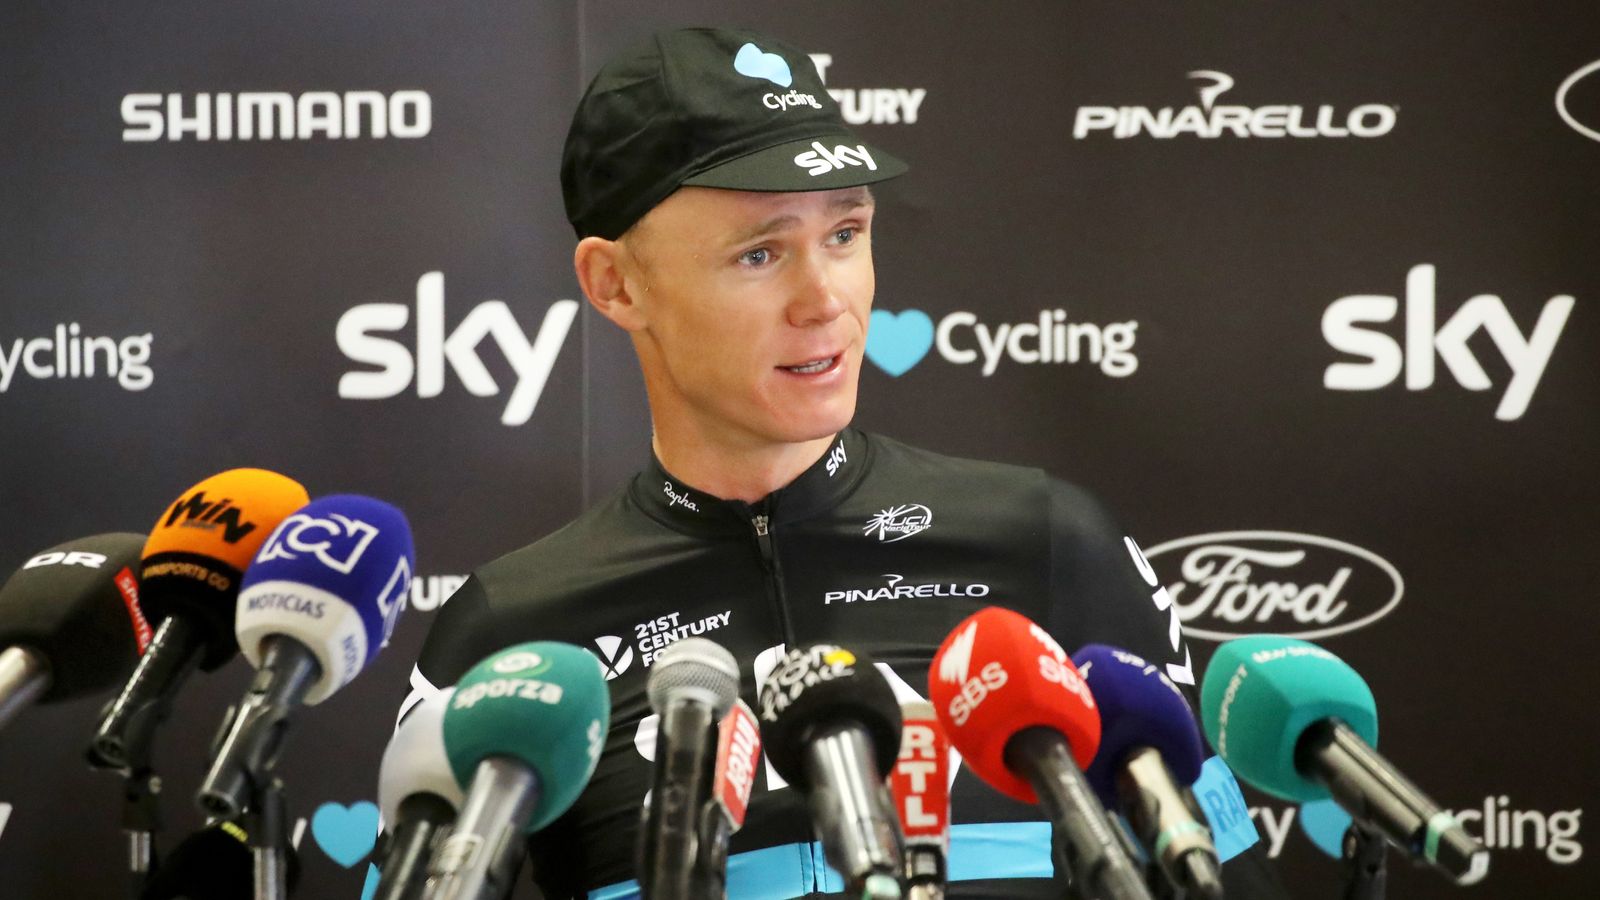 Tour de France Chris Froome predicts race will be decided in Alps